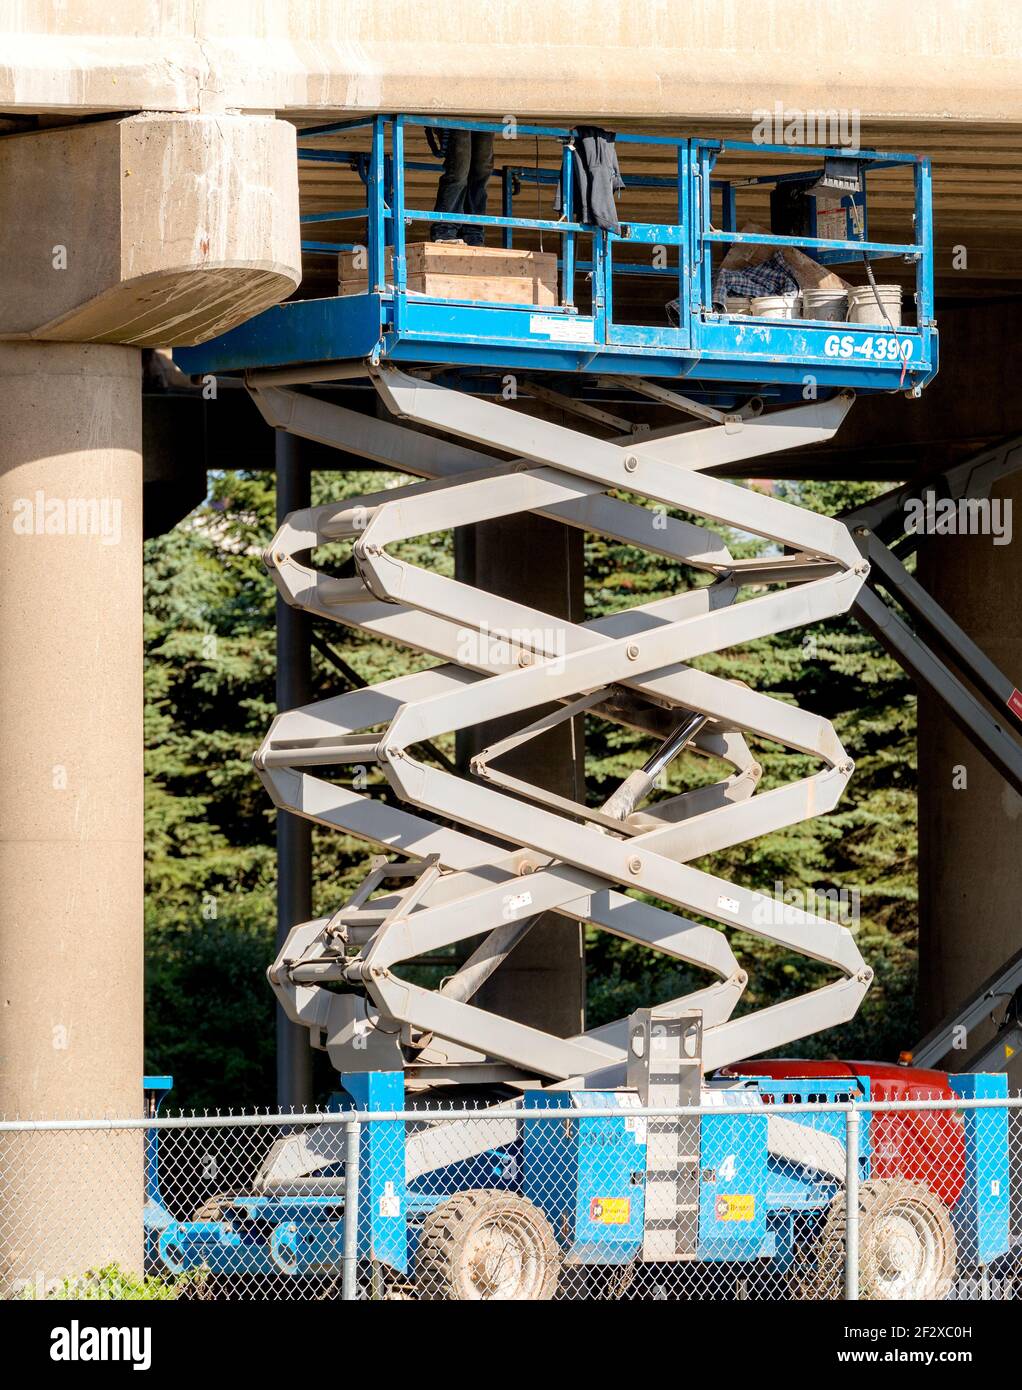 Scissor lift working under an overpass. A worker's legs can be seen on top of the lift. The bottom of the lift is behind a chain link fence. Stock Photo